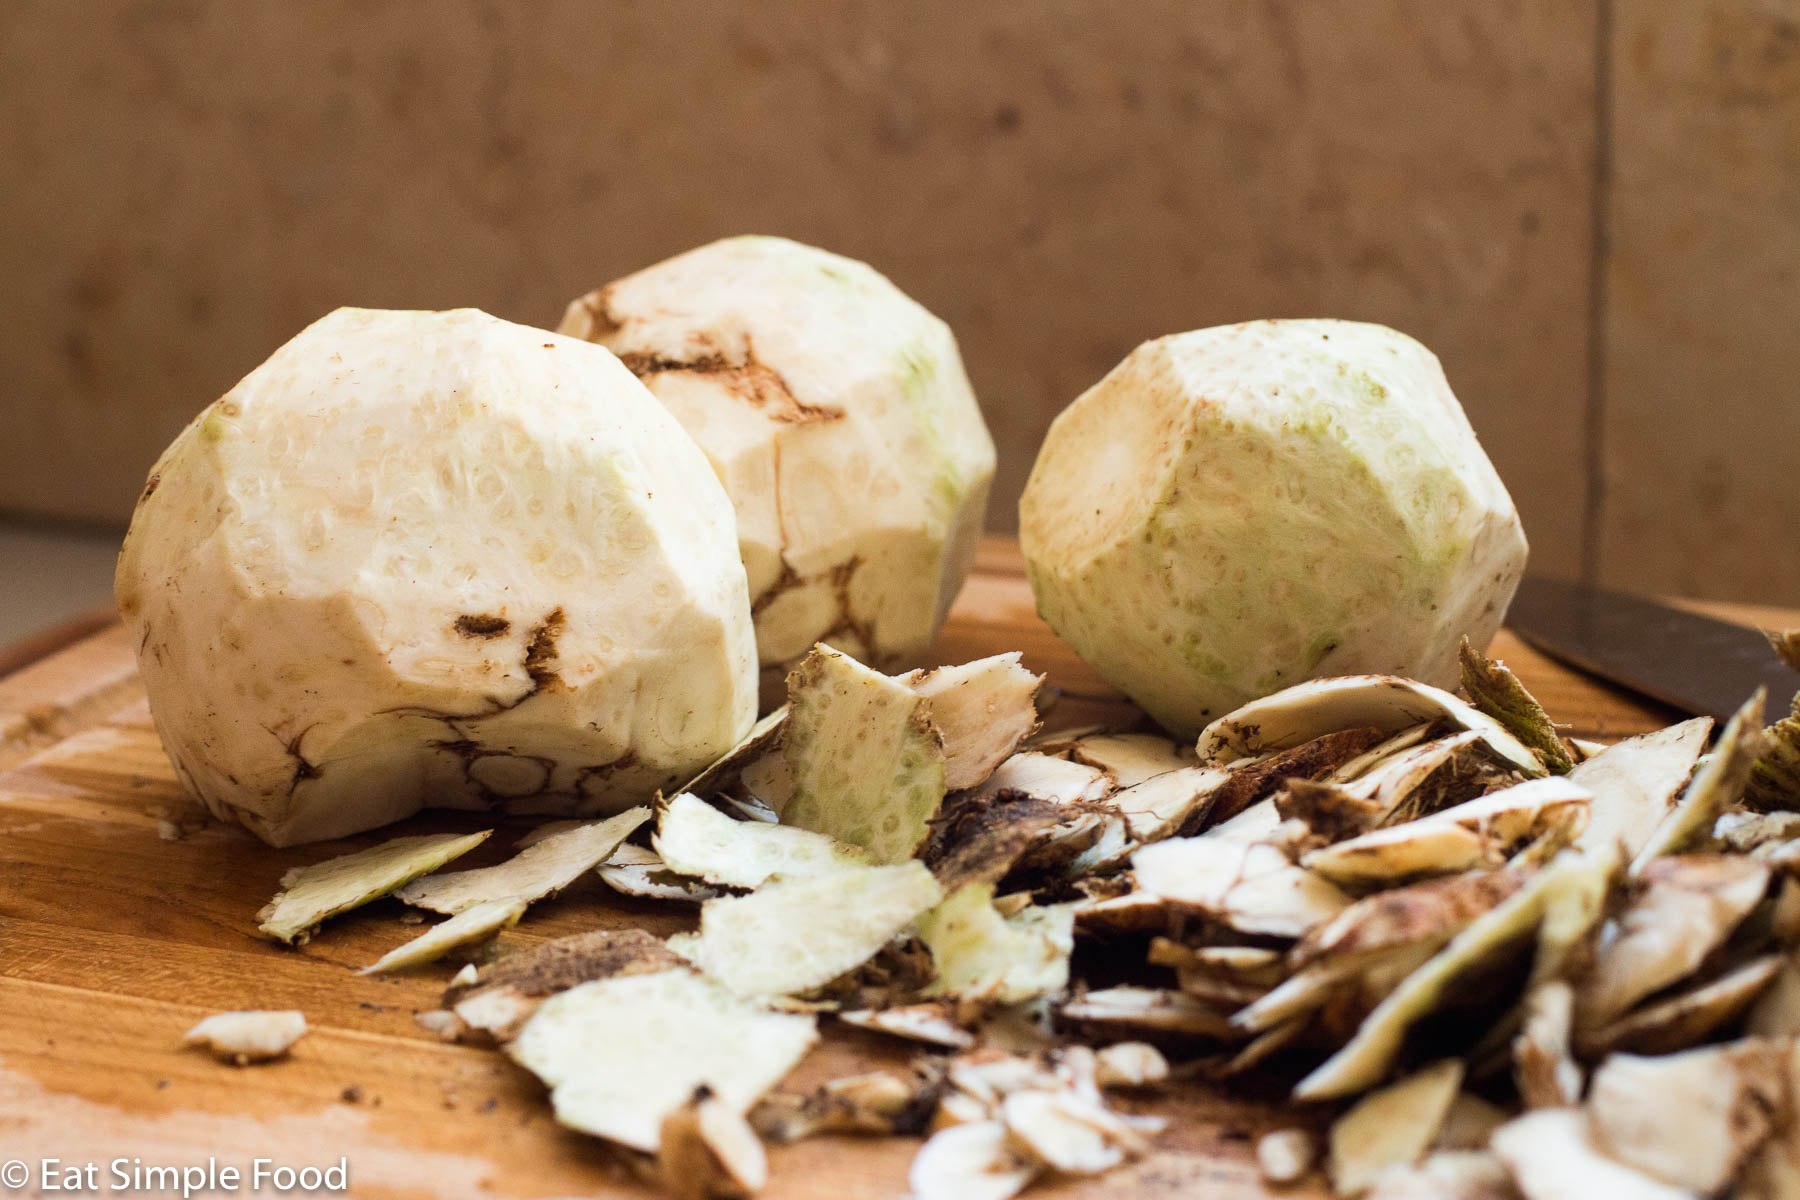 3 peeled celery root (celeriac) bulbs on a wooden cutting board with the peels on the side.